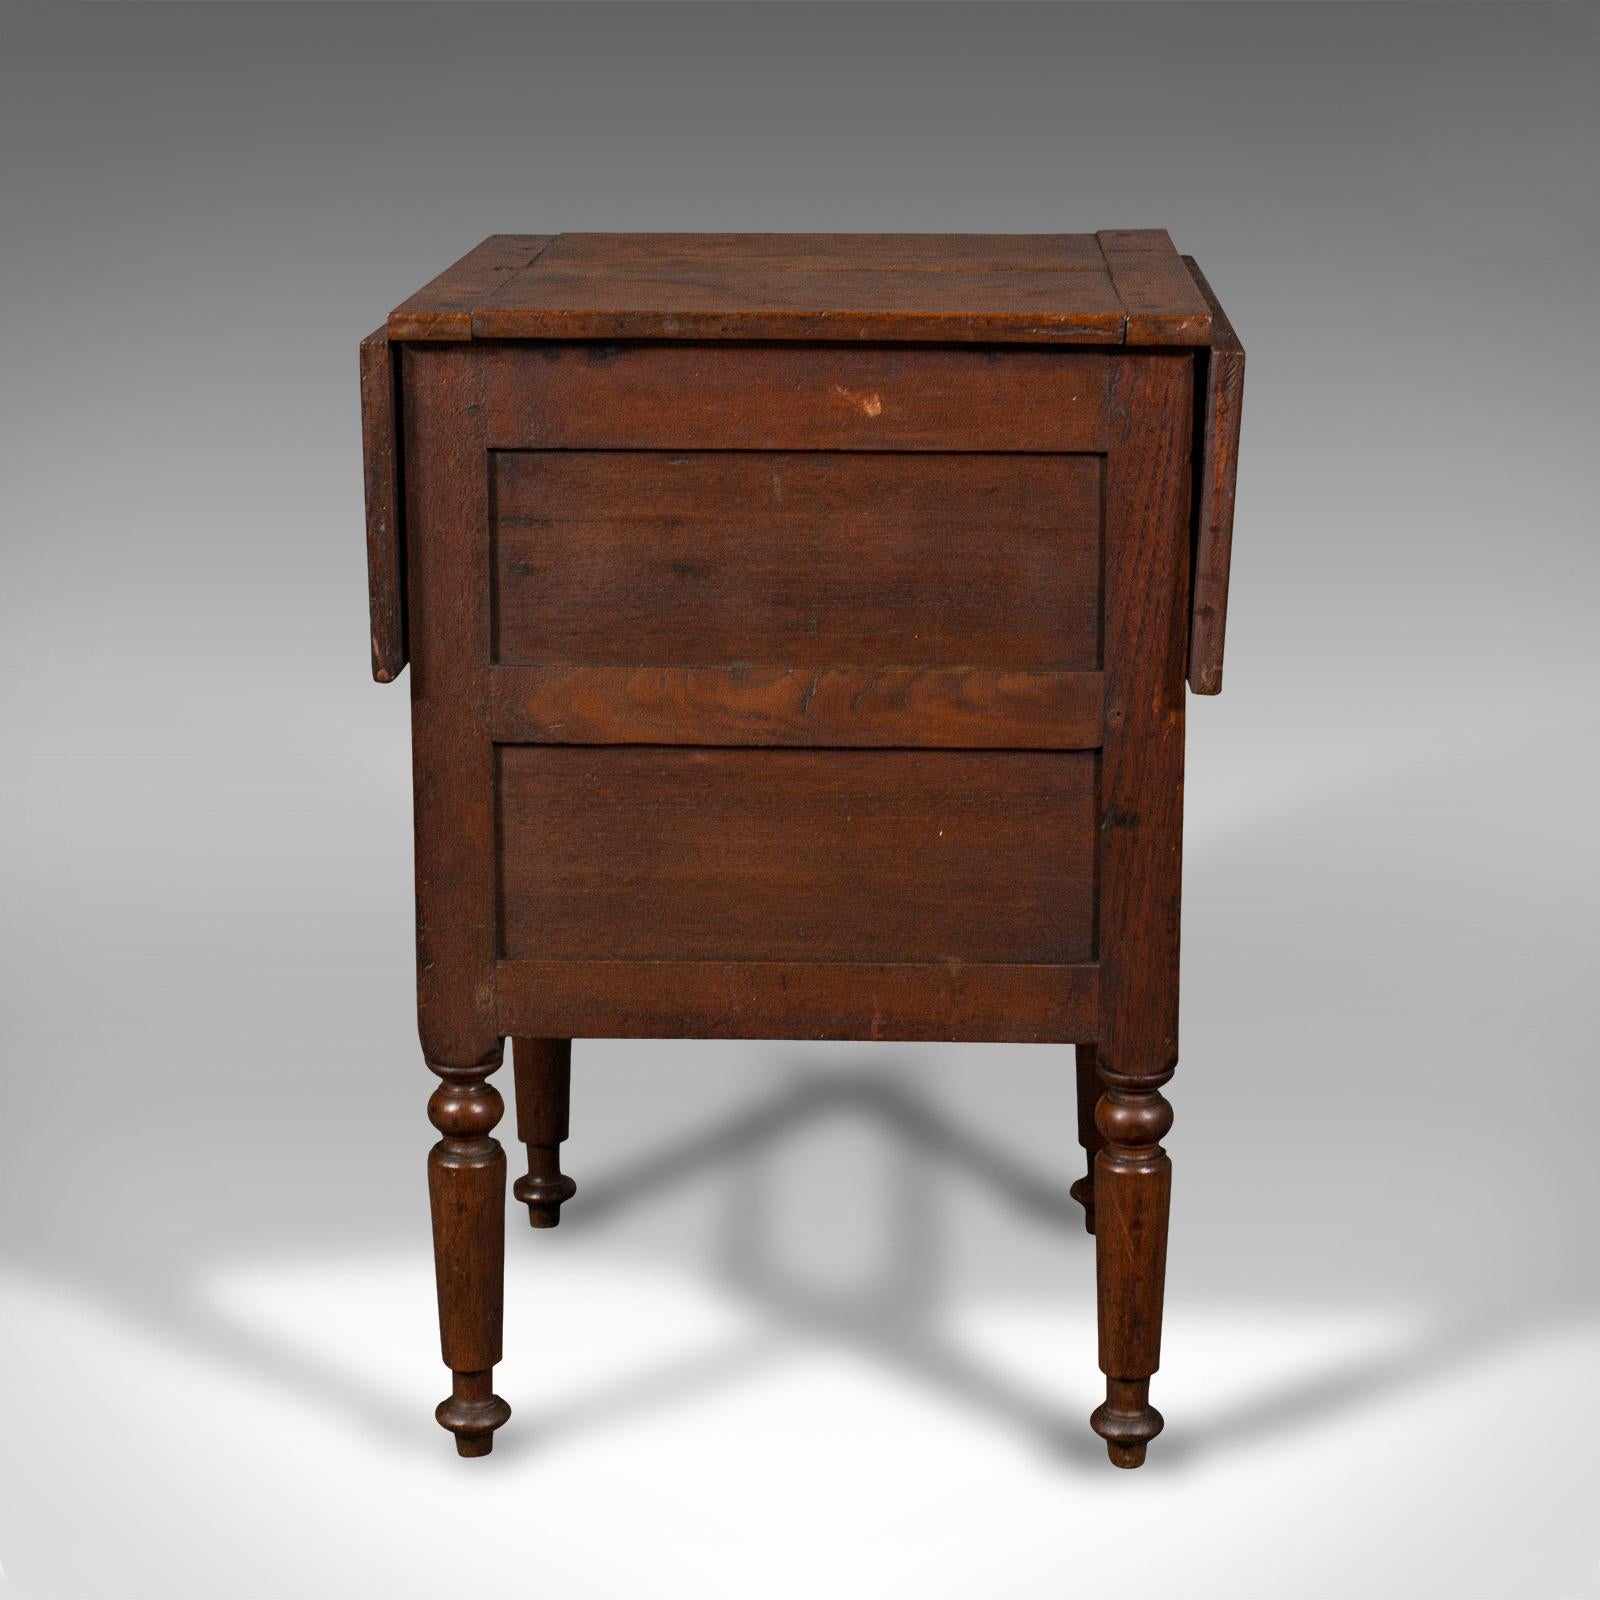 Wood Antique Ship's Wash Stand, English, Drop Flap Nightstand, Victorian, Circa 1850 For Sale